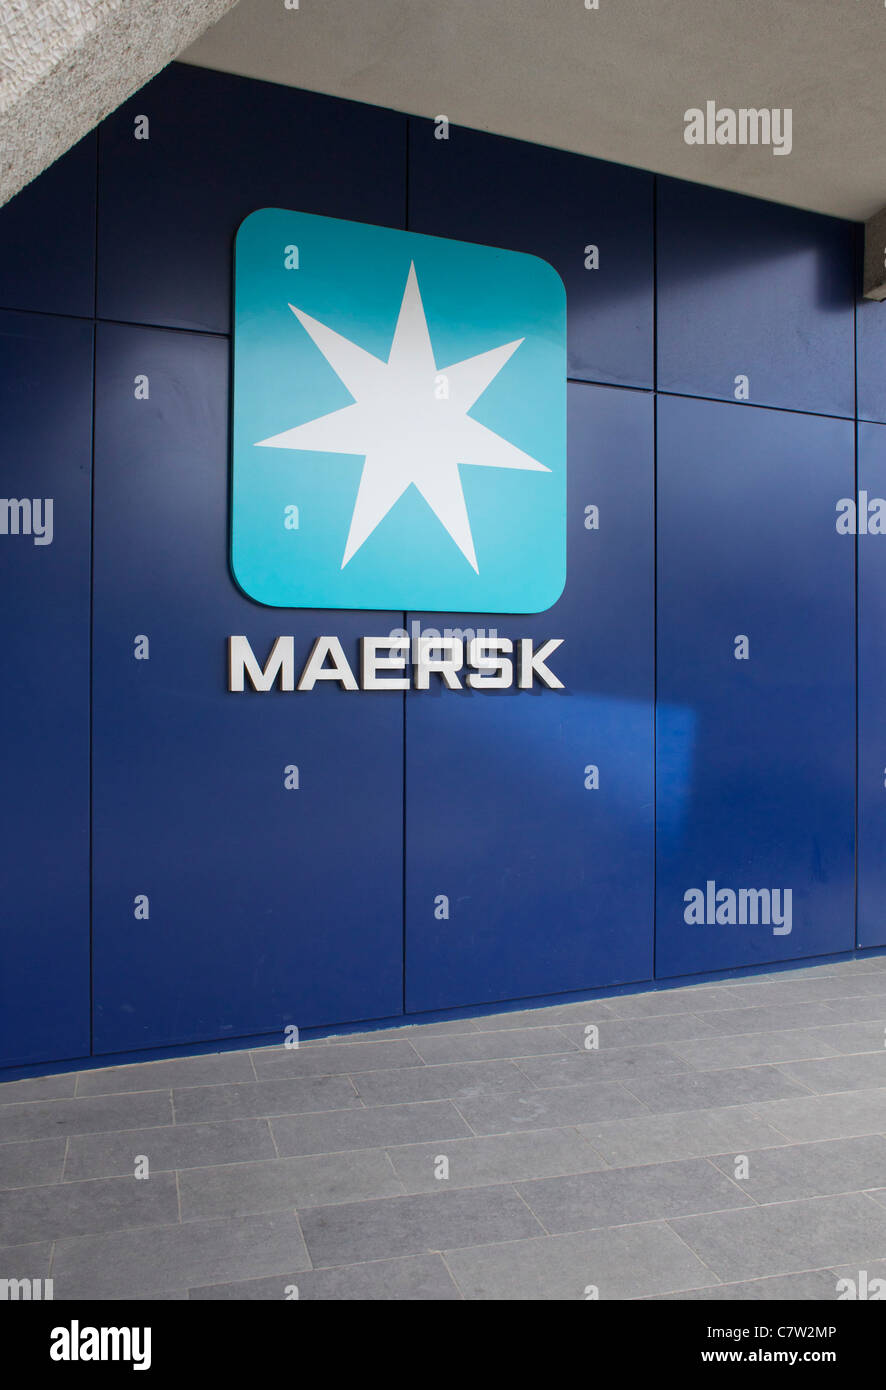 Maersk logo on side of building Stock Photo